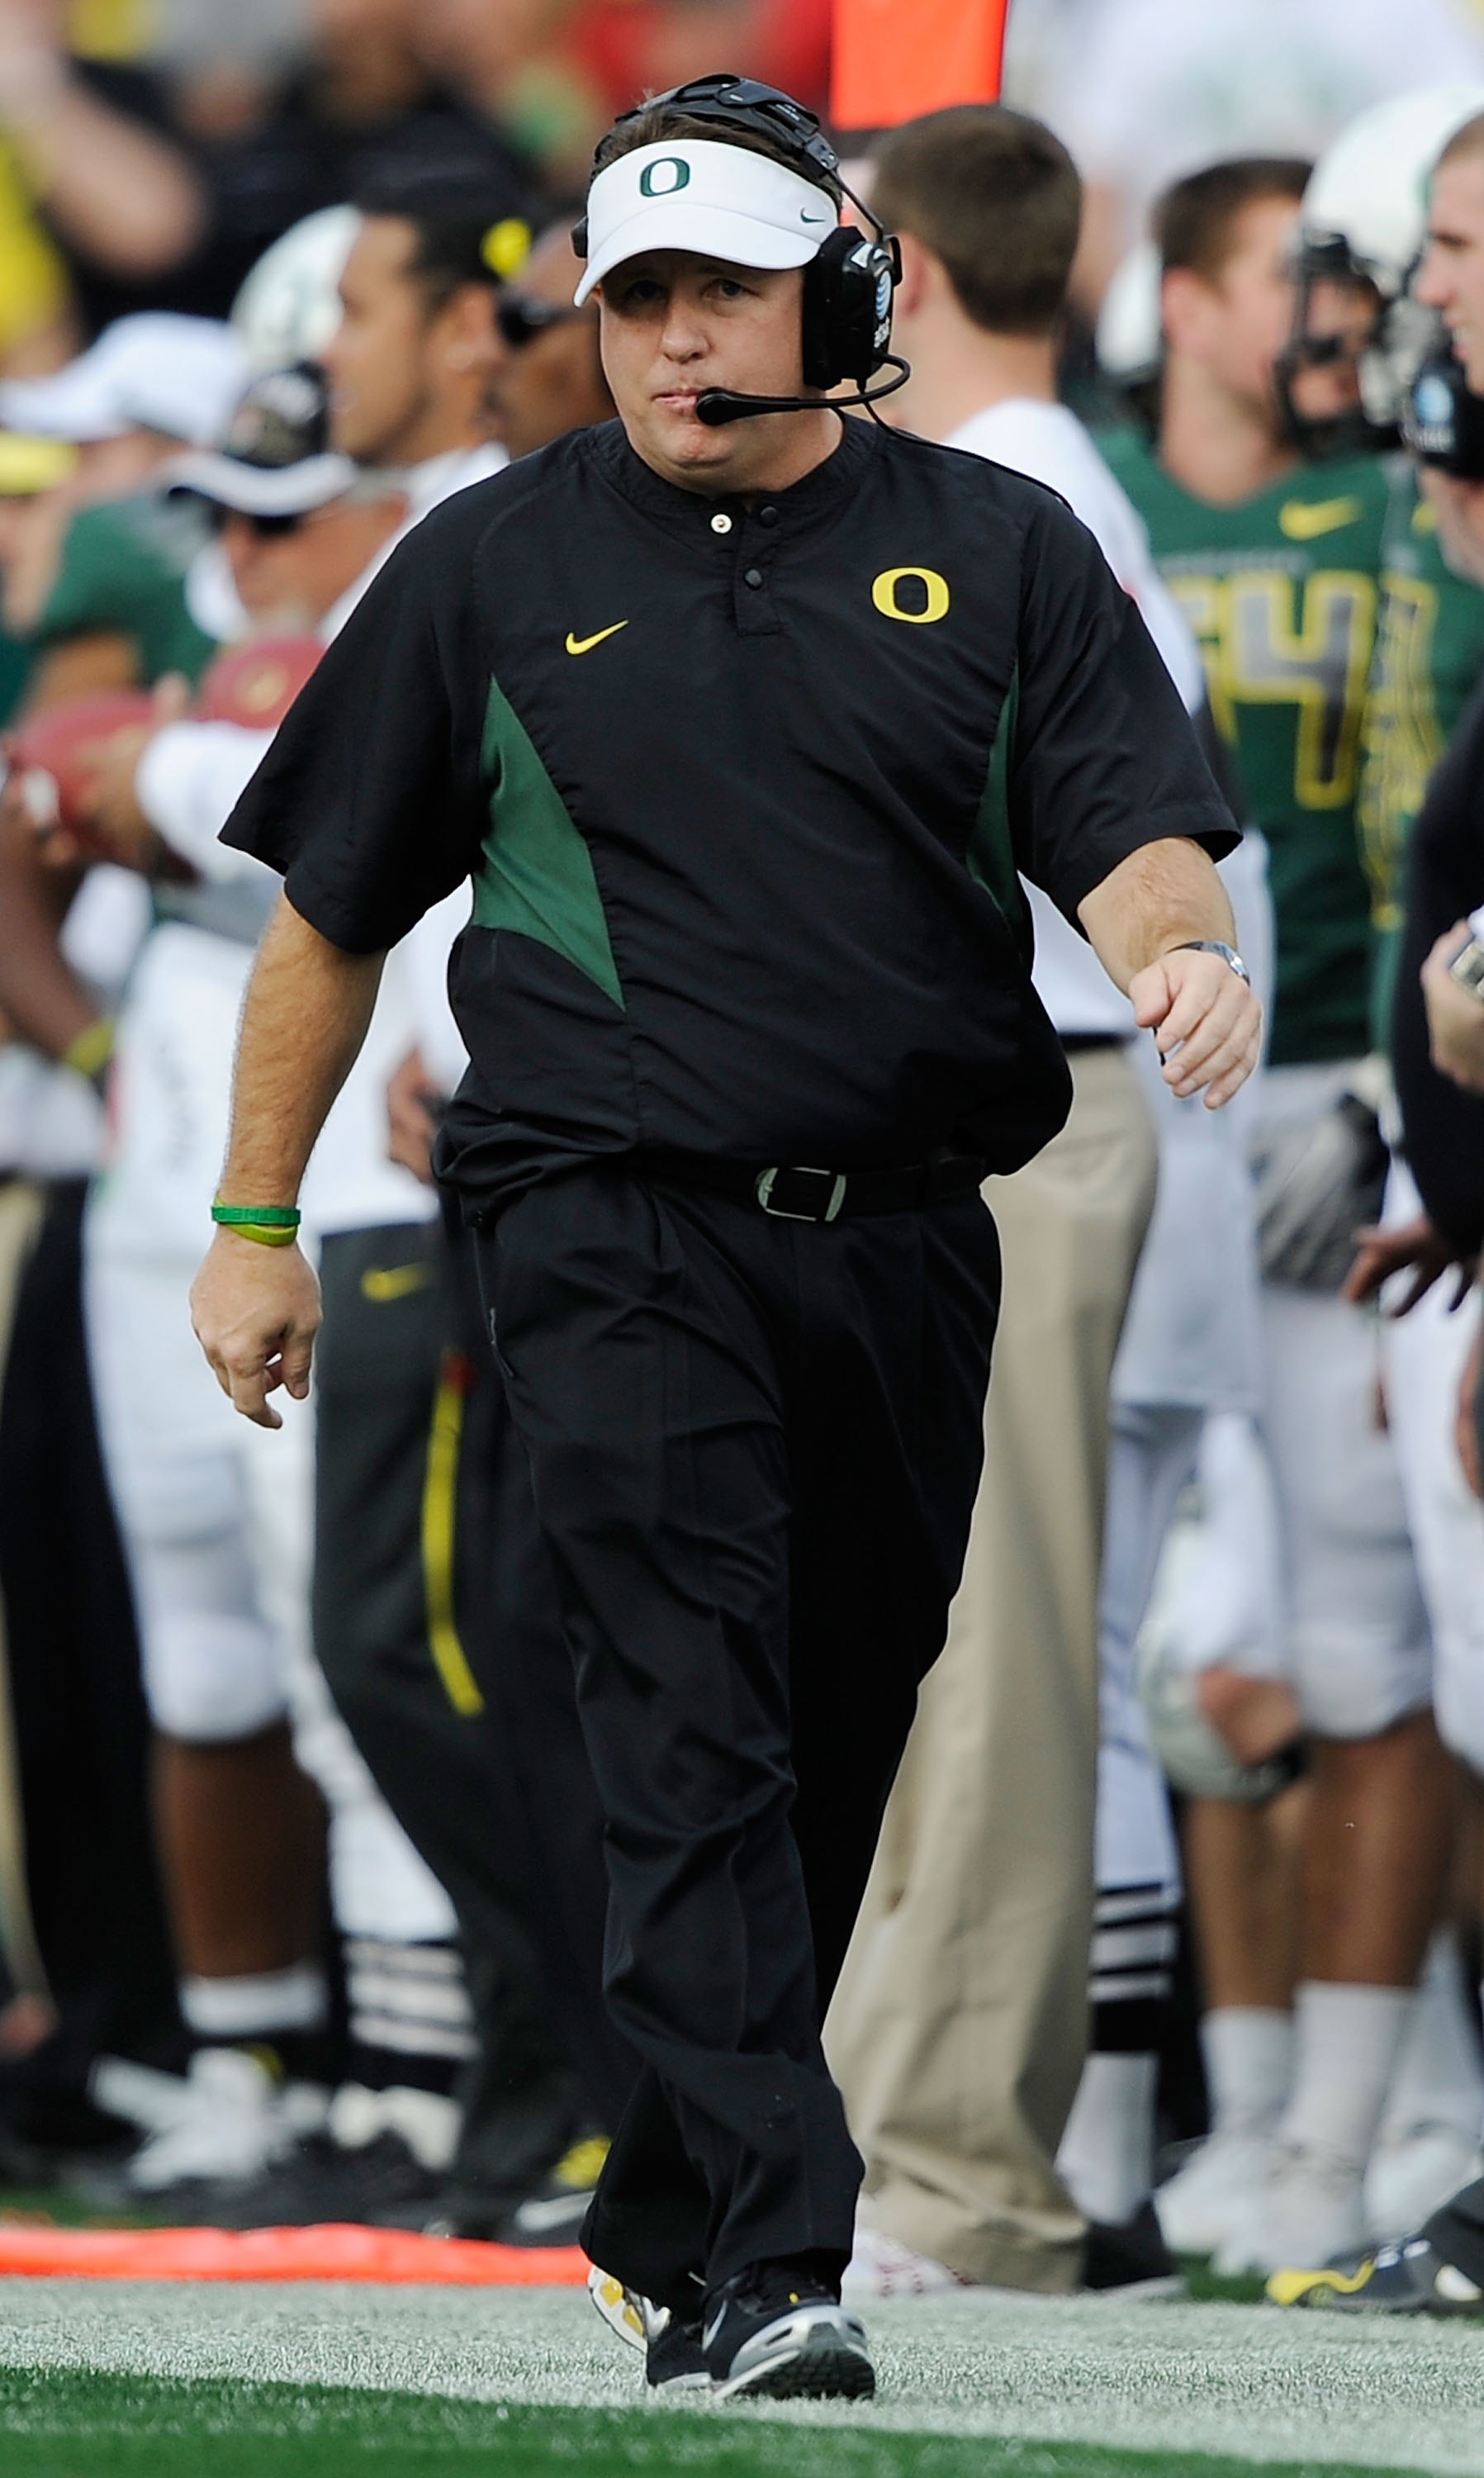 PASADENA, CA - JANUARY 01:  Head coach Chip Kelly of the Oregon Ducks stands on the sidelines during the game against the Ohio State Buckeyes at the 96th Rose Bowl game on January 1, 2010 in Pasadena, California.  (Photo by Kevork Djansezian/Getty Images)